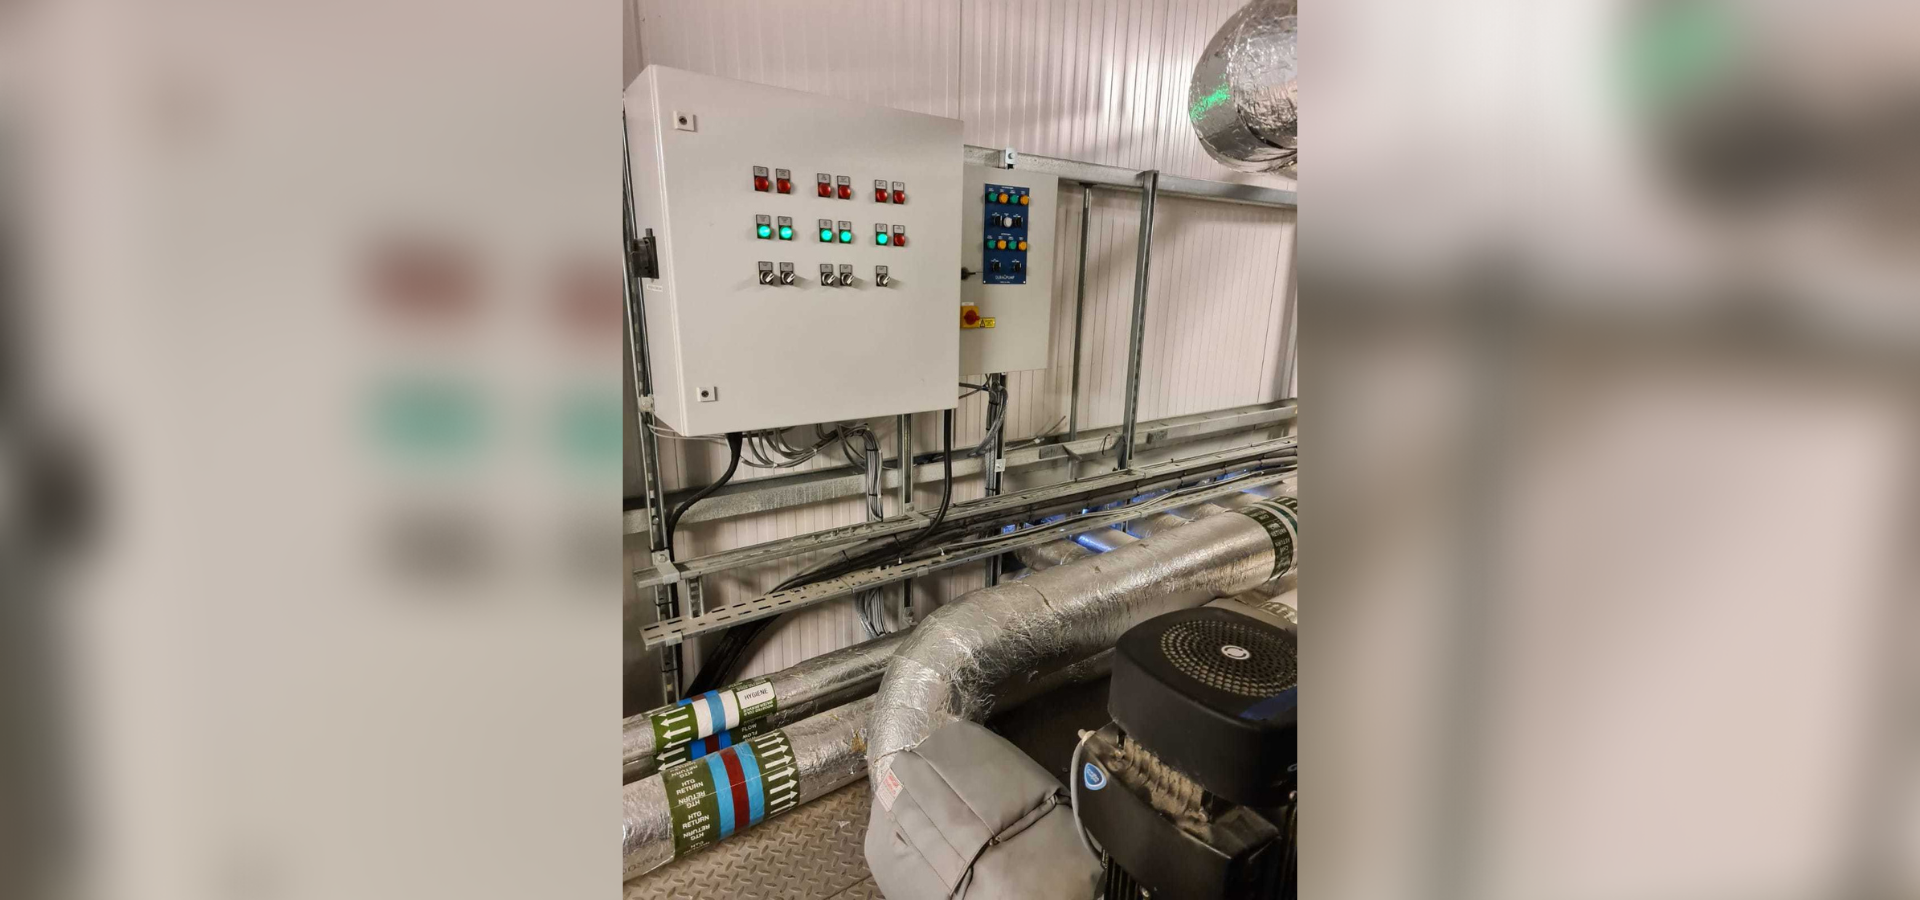 Improved Dual Pump System For A Leading Poultry Processing Business